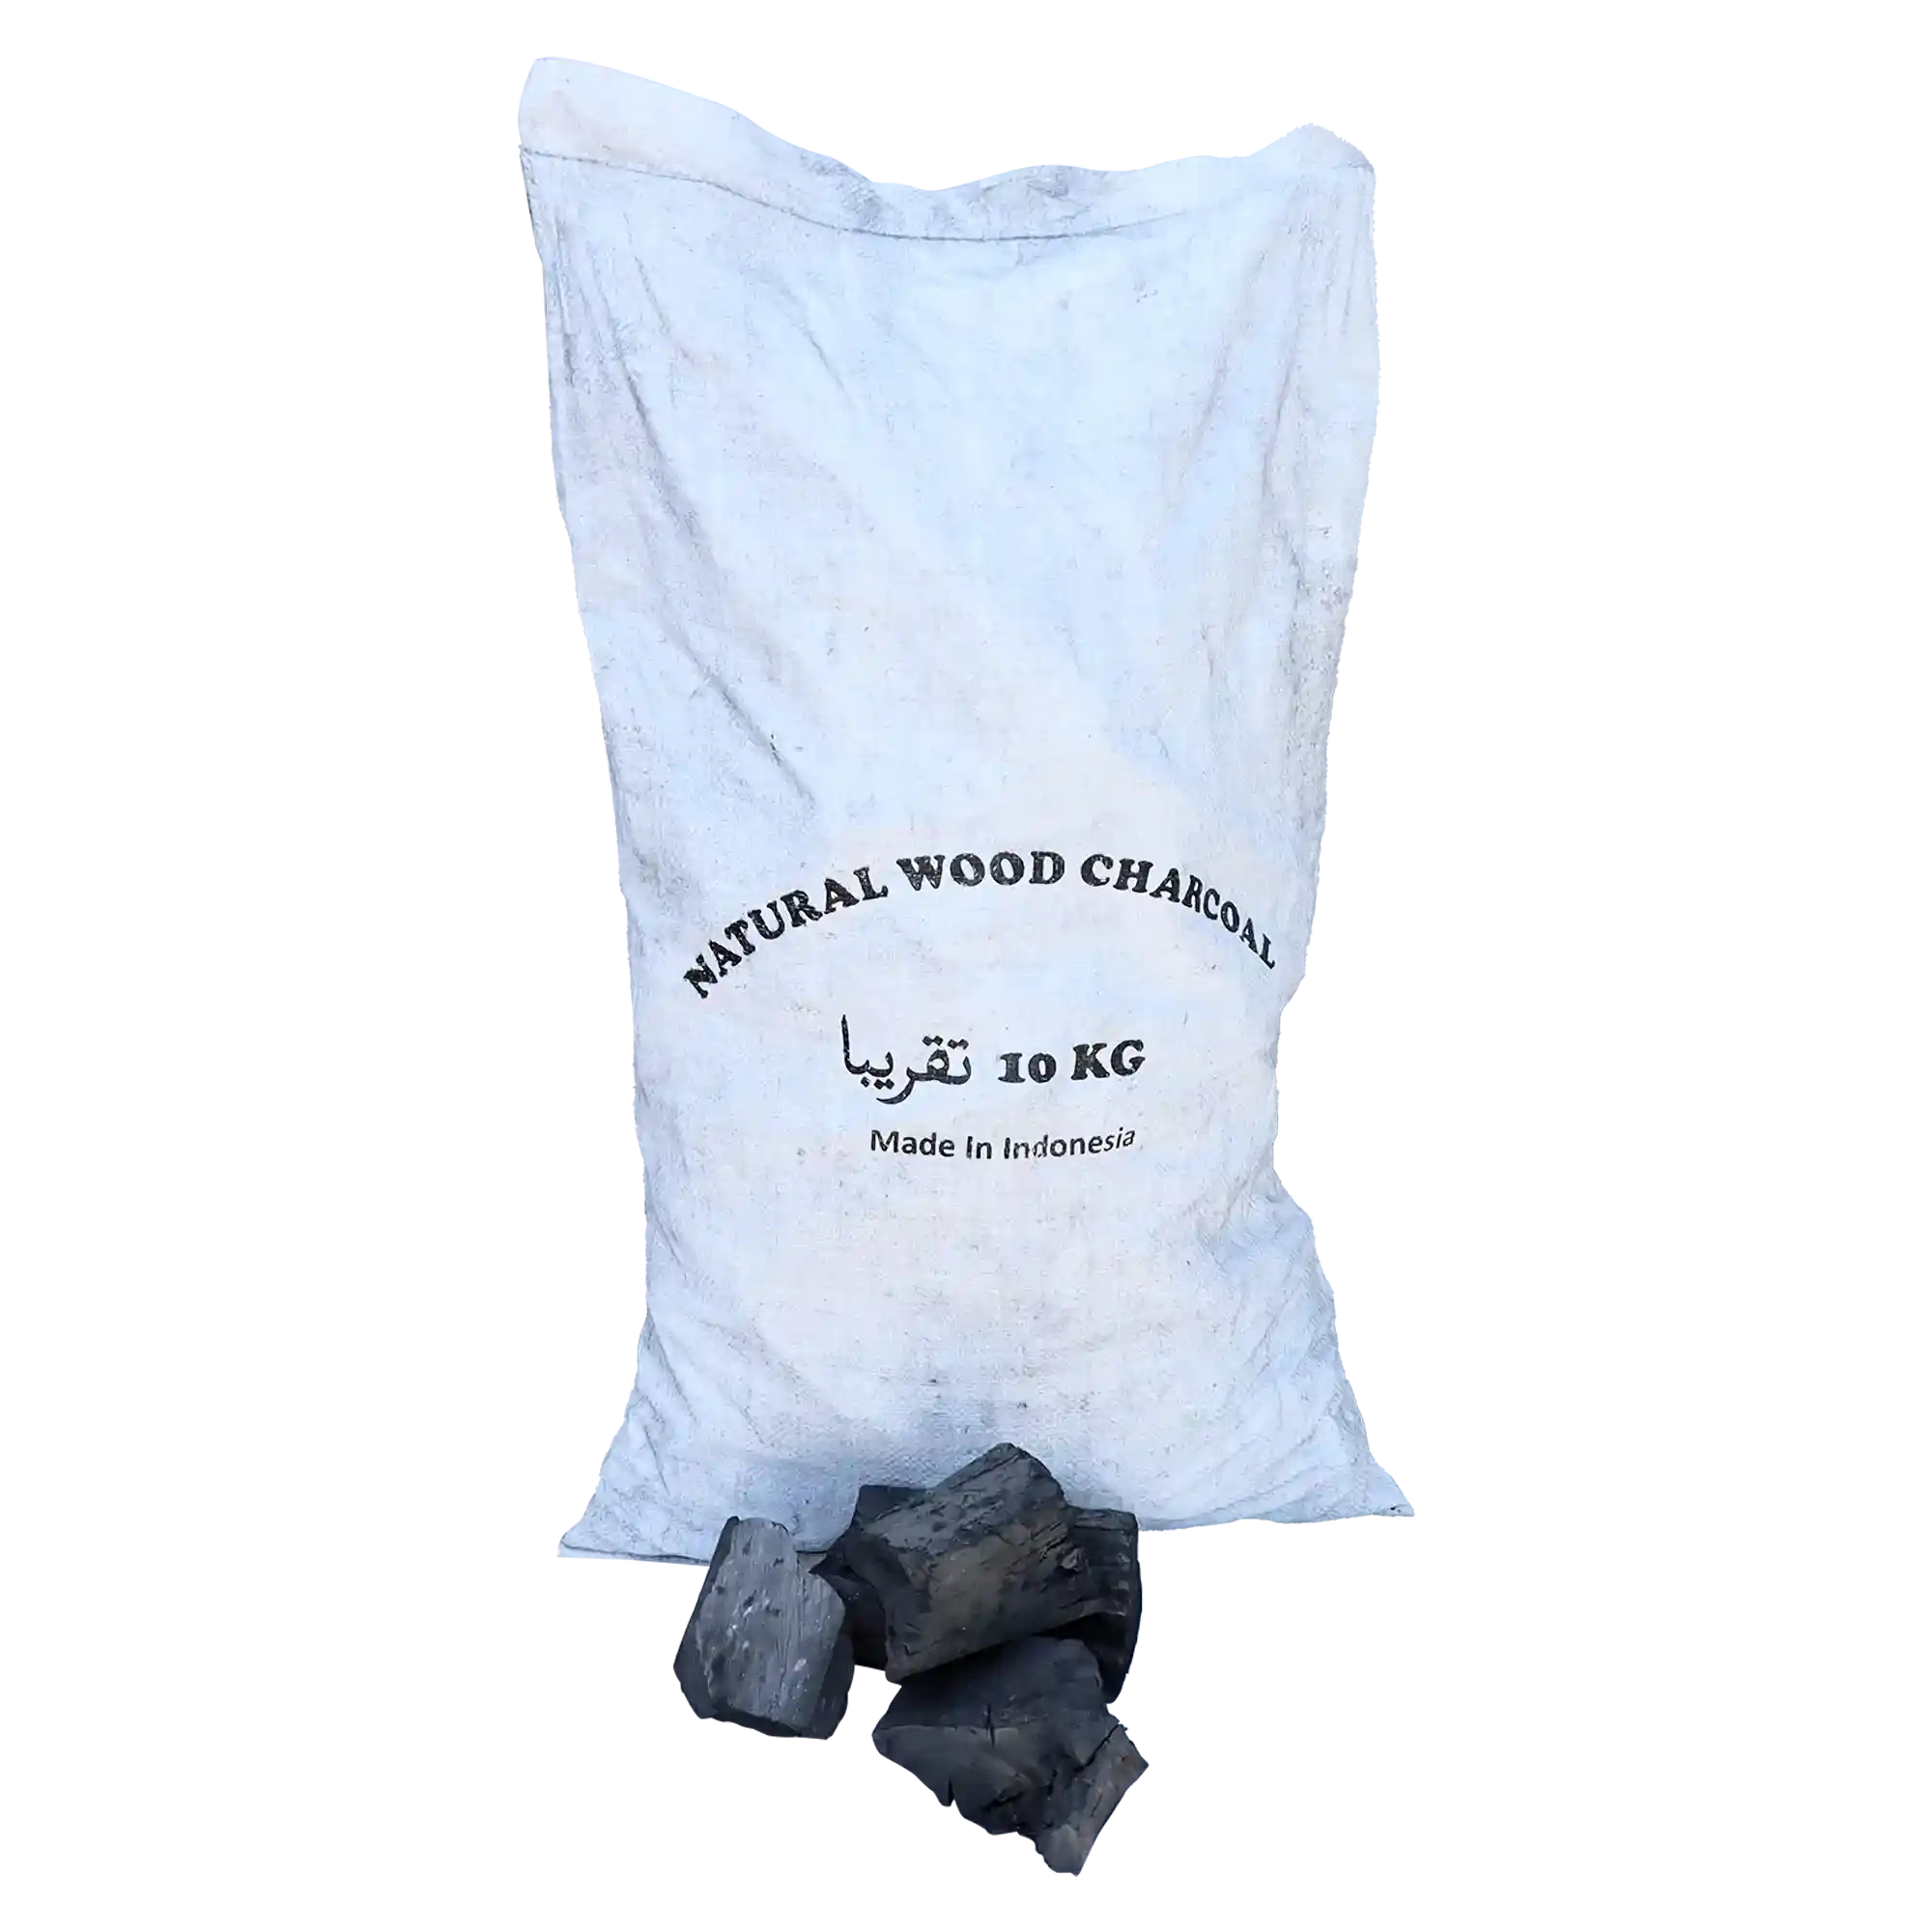 KAC -Indonesian grilled charcoal (pieces) 10 kg